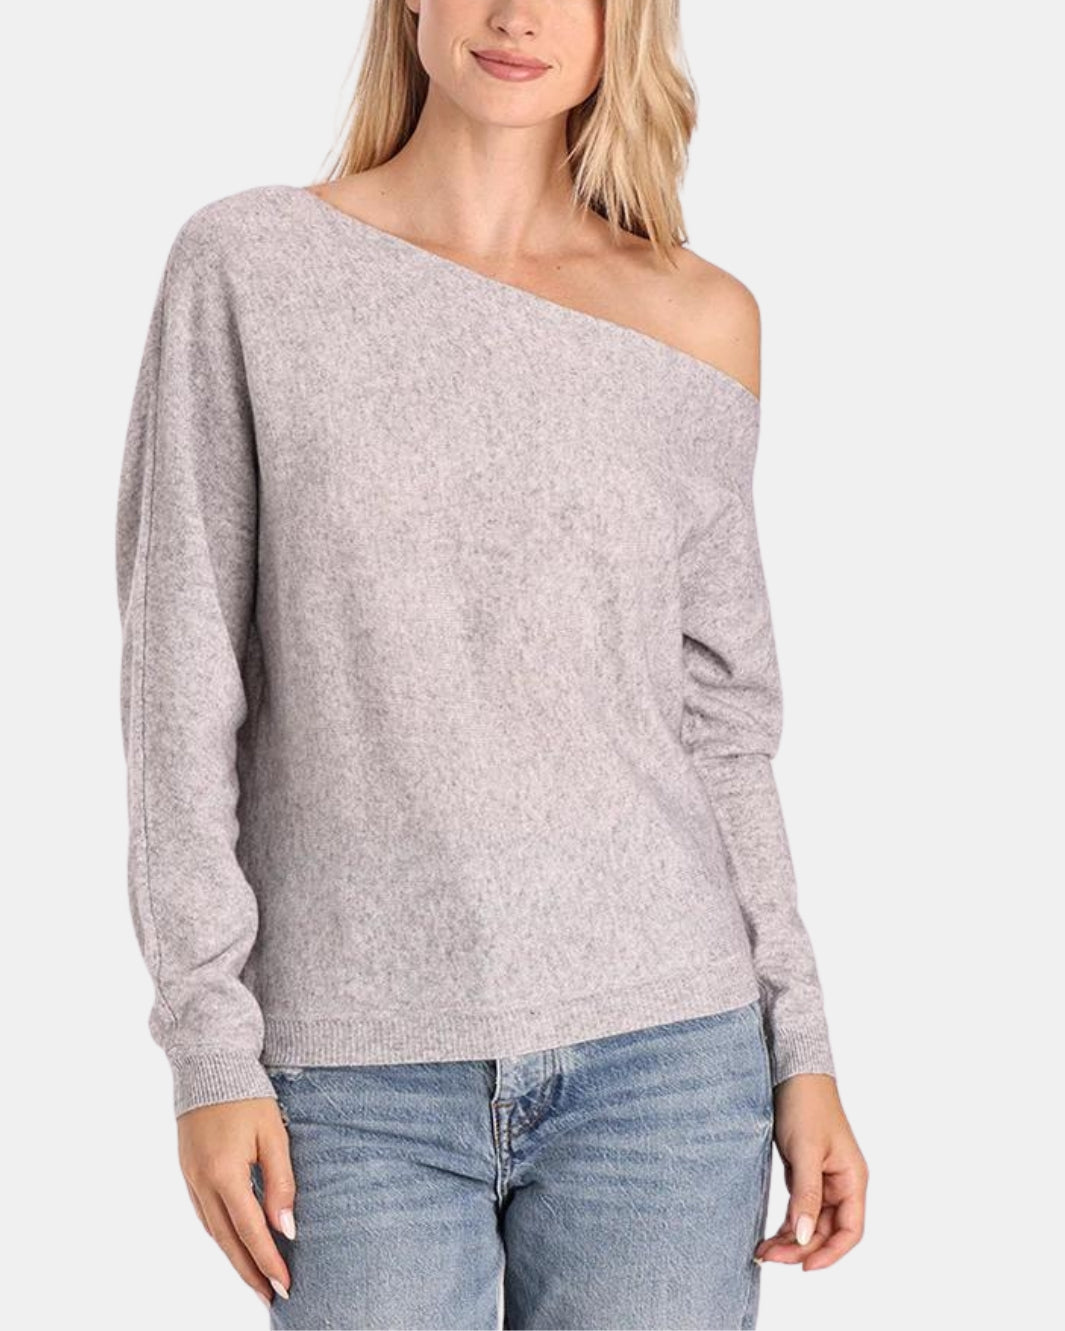 COTTON CASHMERE OFF THE SHOULDER TOP IN LIGHT HEATHER GREY - Romi Boutique